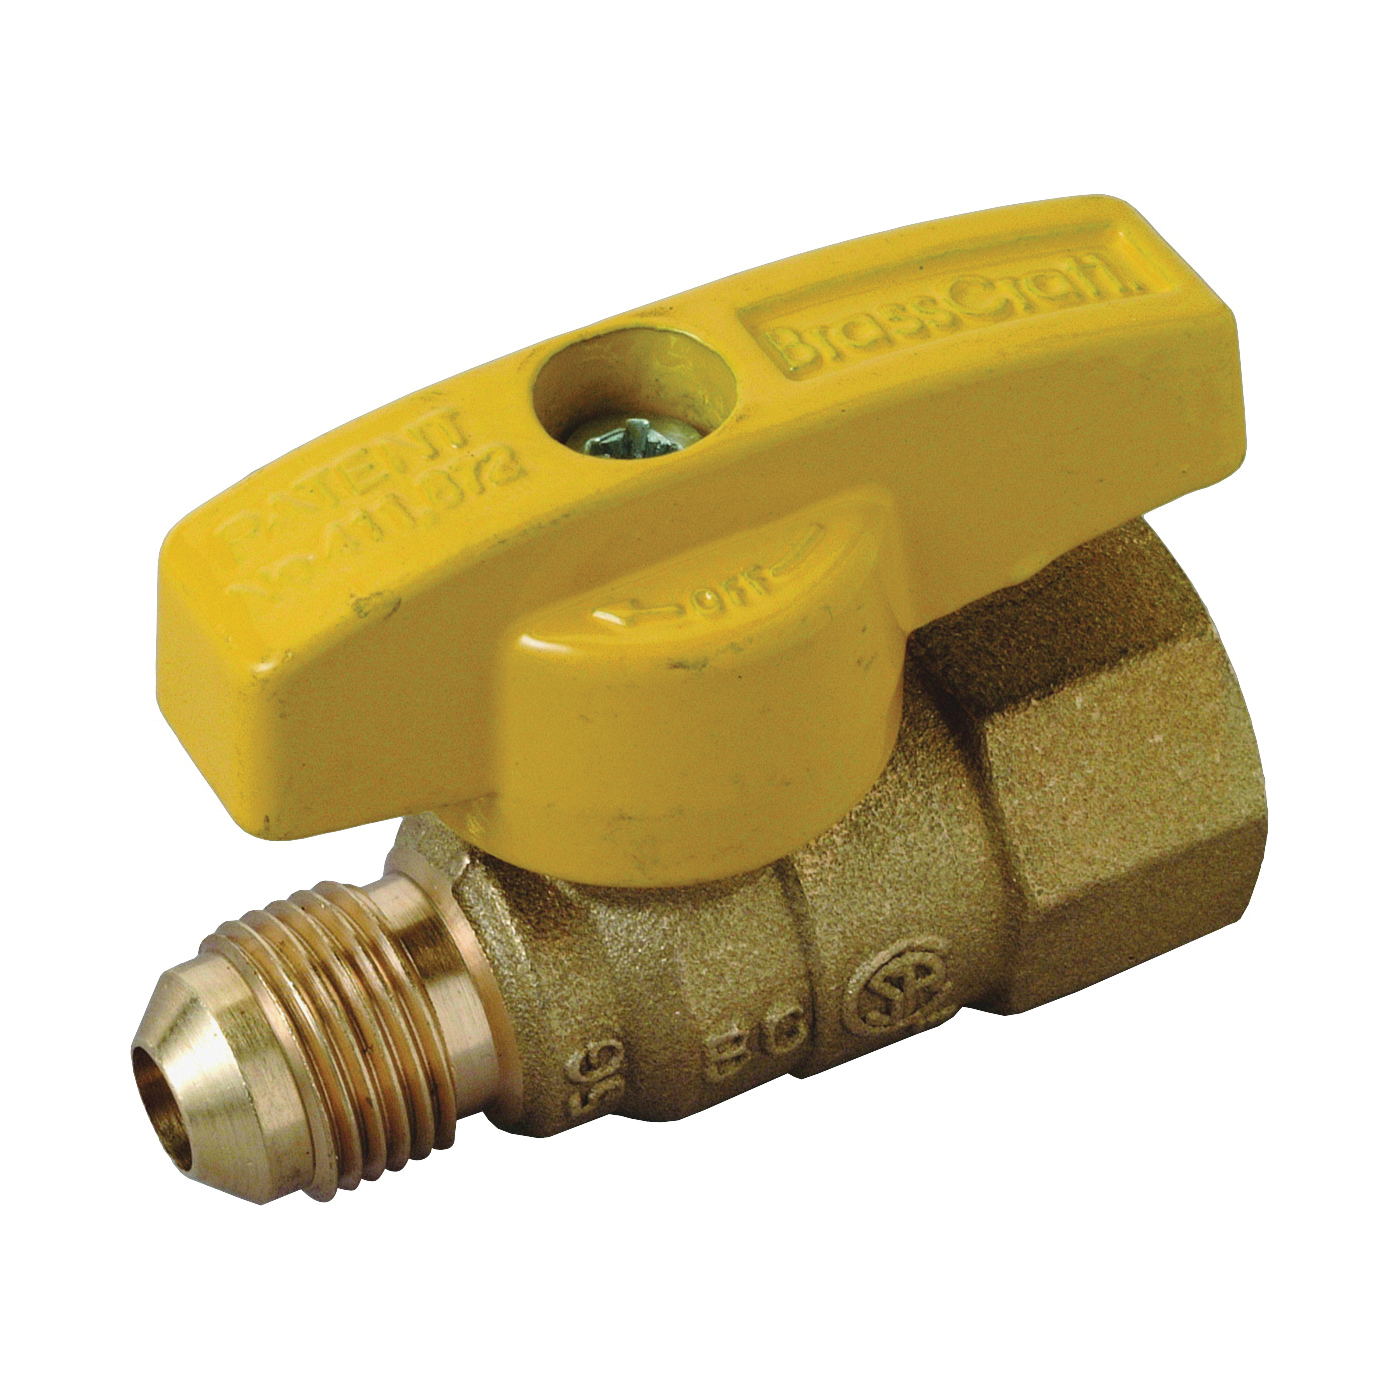 Mini Ball Valve with Male Thread Pipe 16x1/2" Kit 5 Fuse 